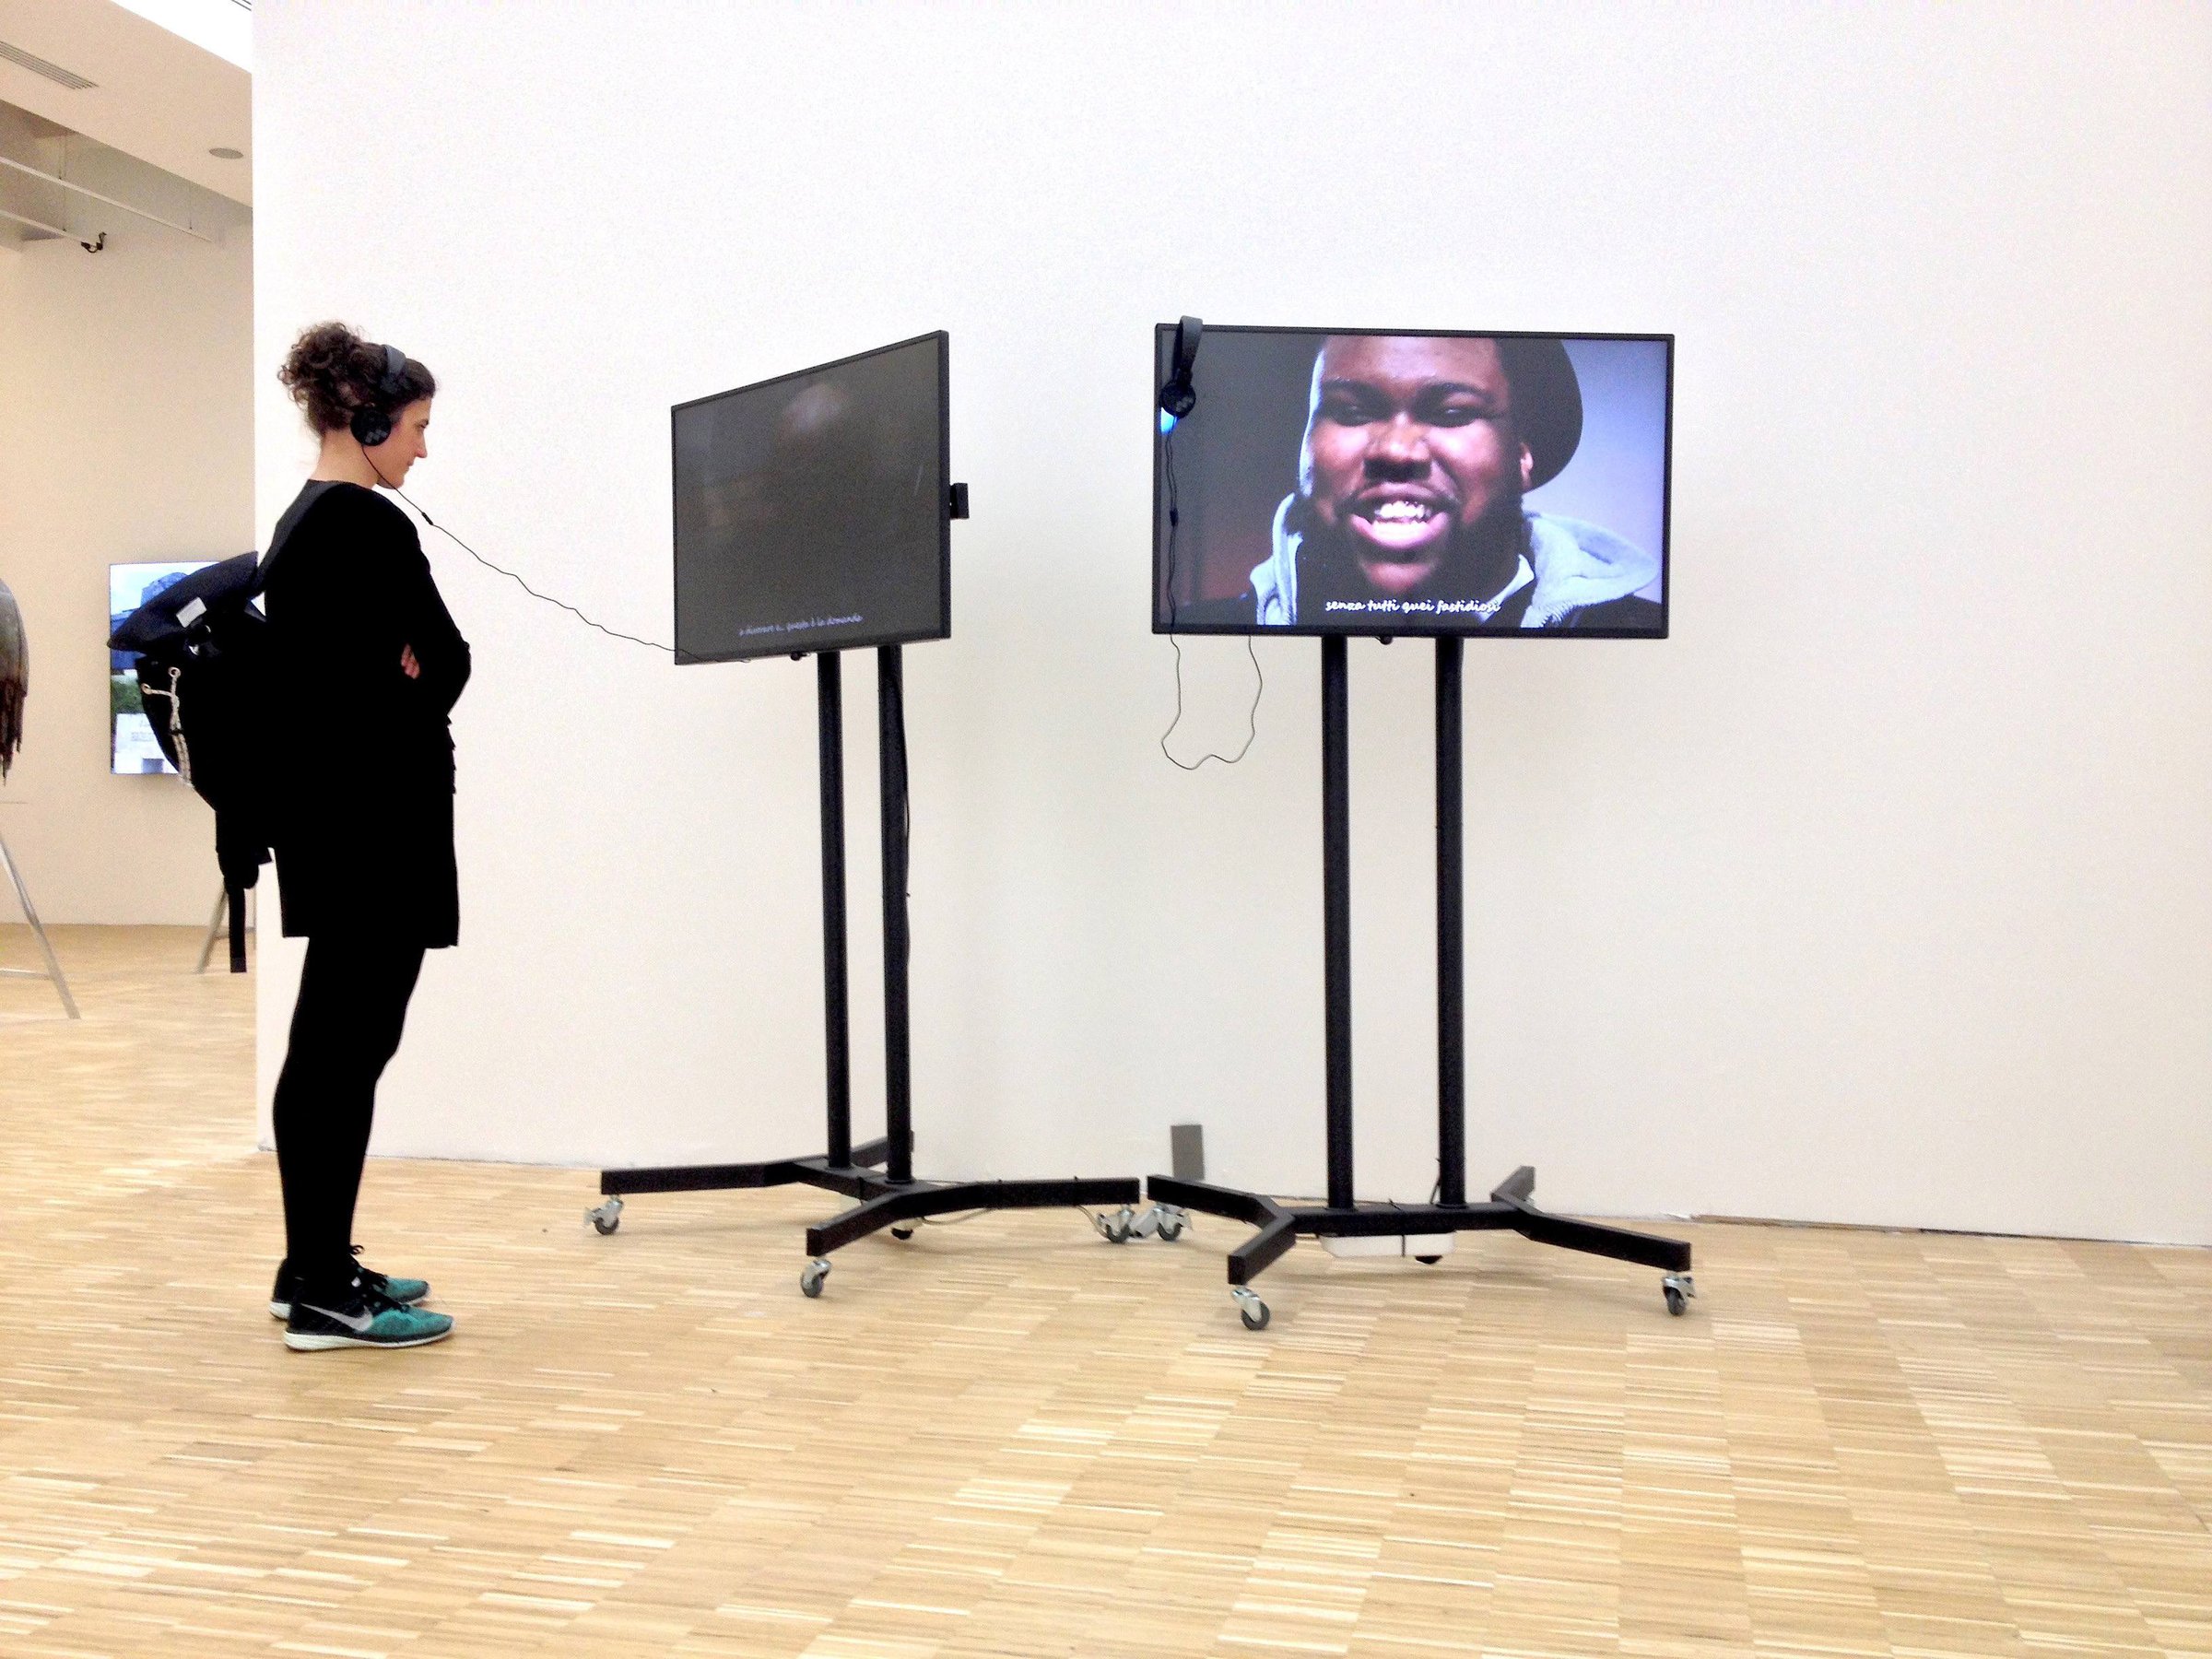 2265, 2015 2 channel installation, HD video, color, sound - 12’, installation view at Triennale, Milano, 2015